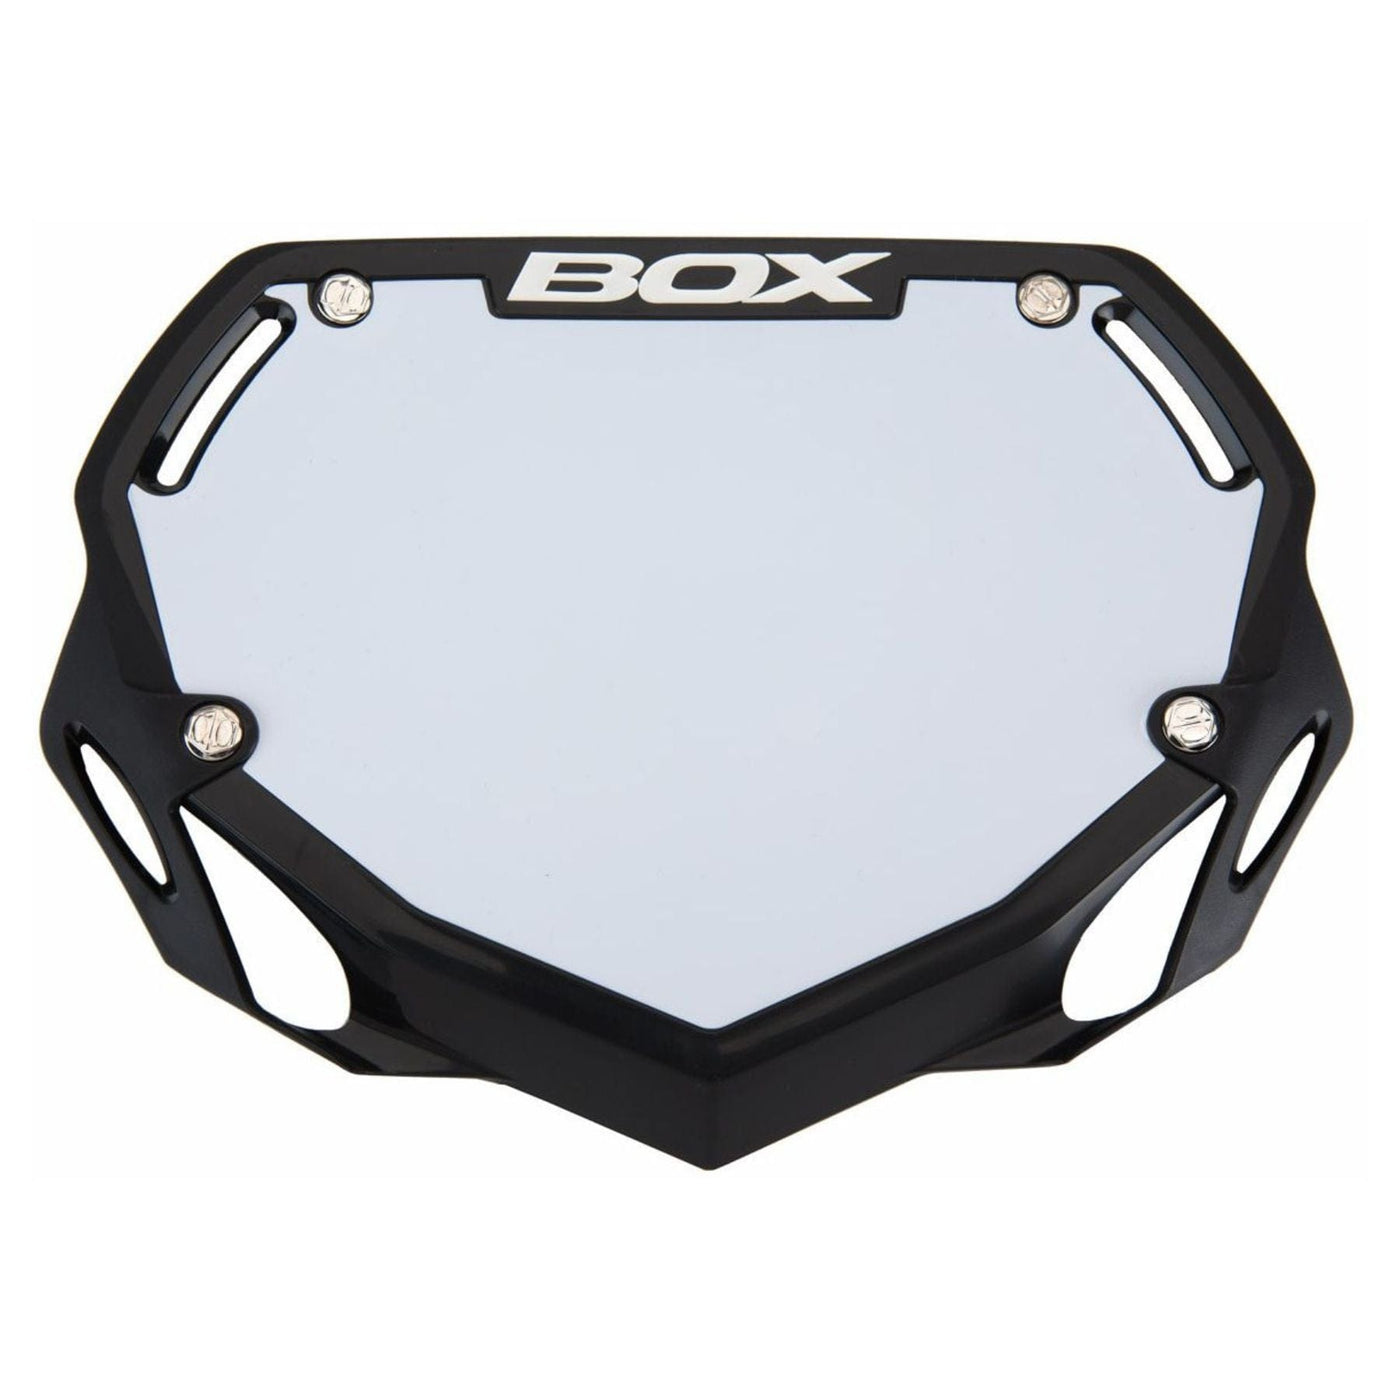 Box One BMX Racing Number Plate - Black - Small